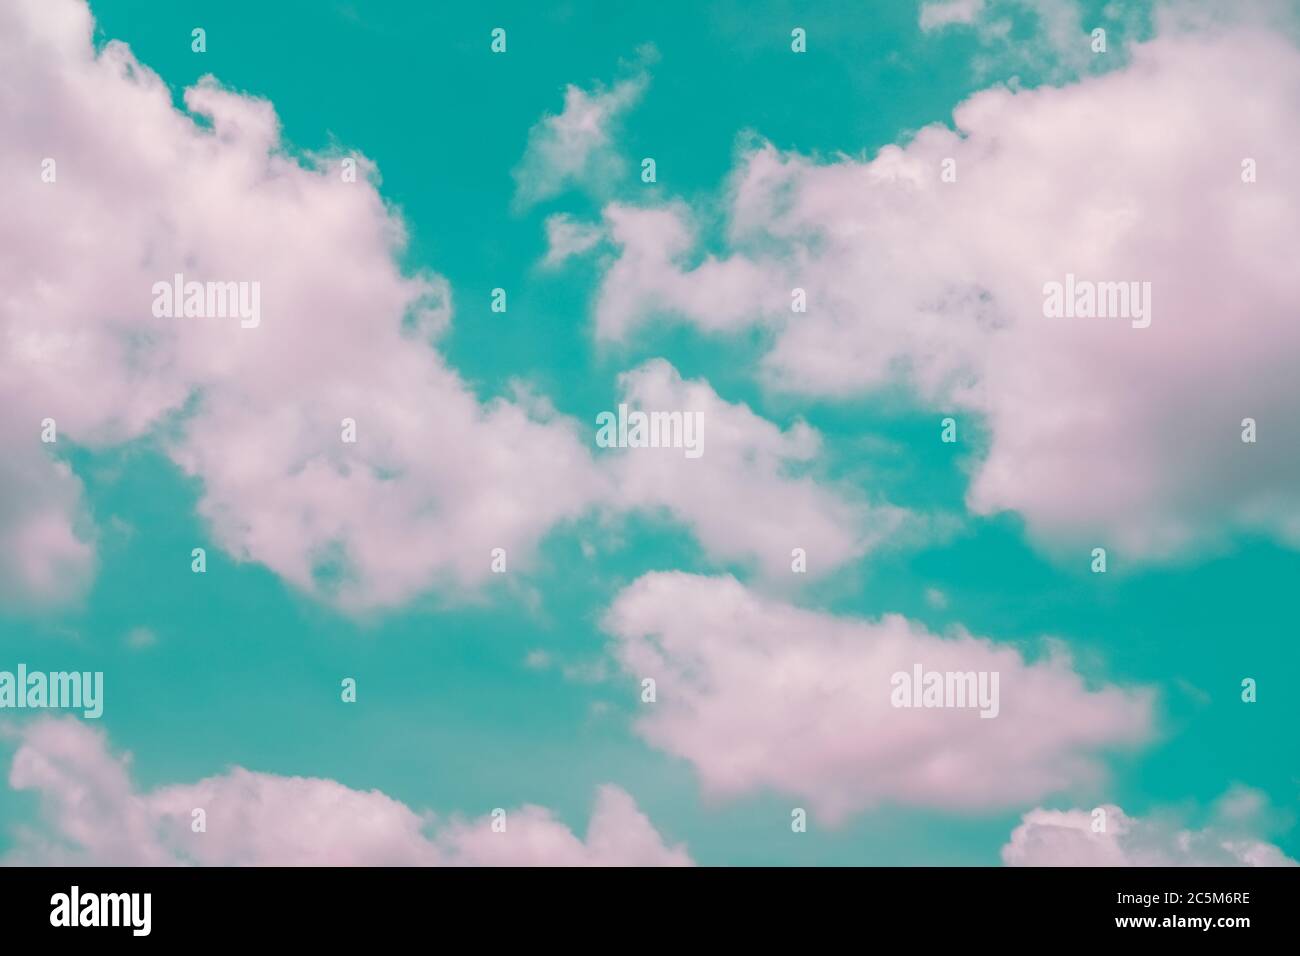 Copy space summer blue sky and white pink pastel hilight cloud abstract minimal background. Stock Photo